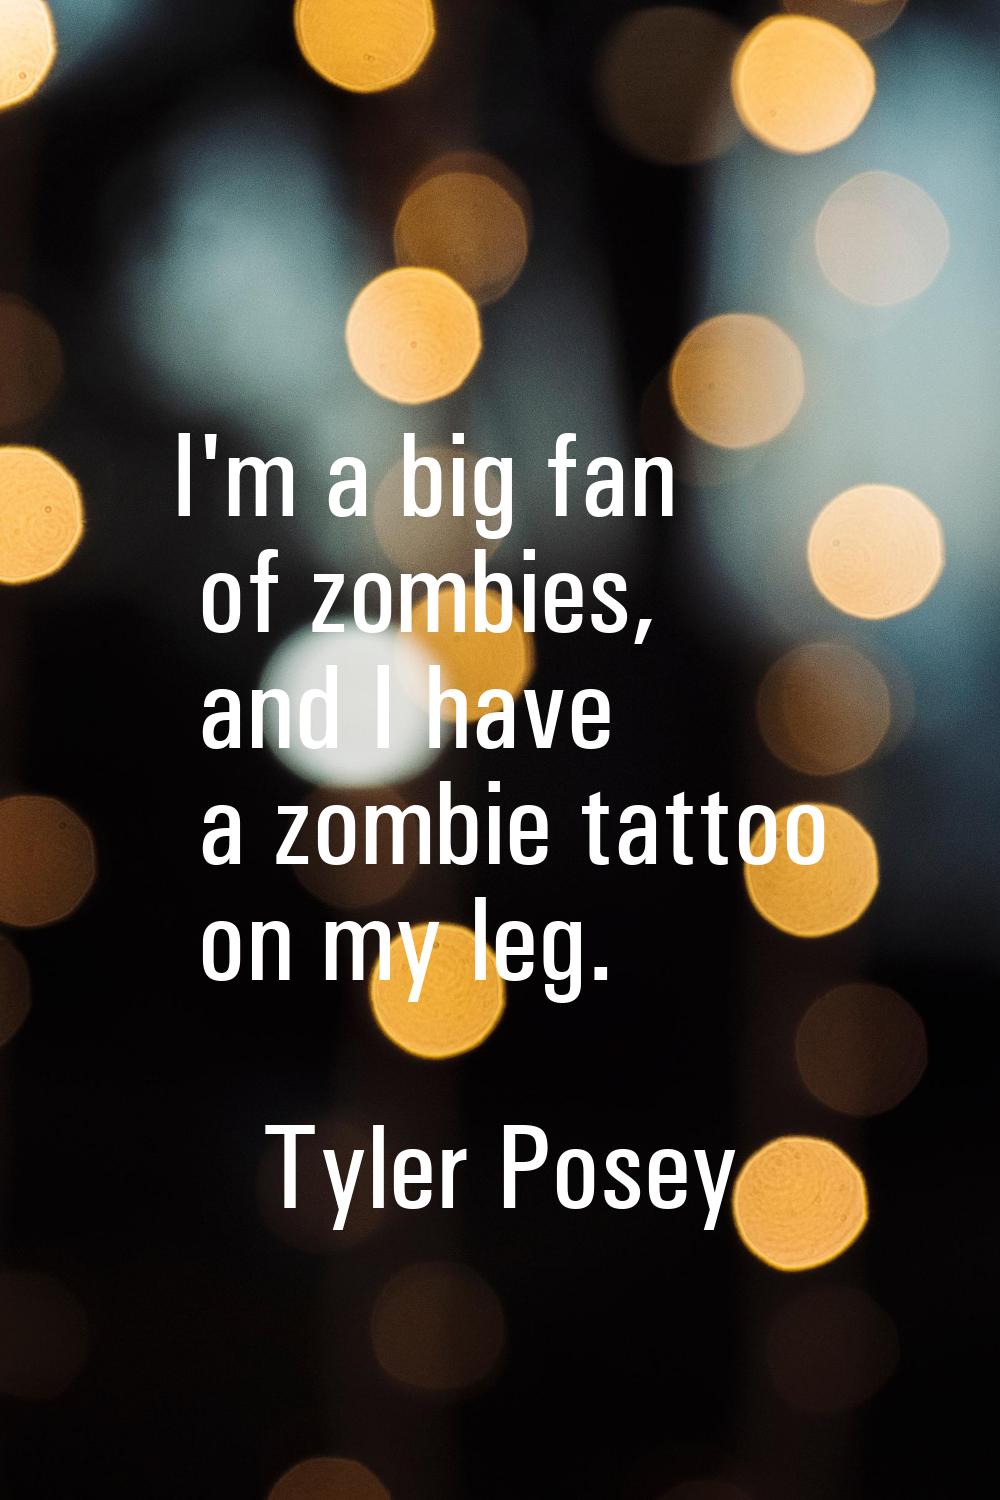 I'm a big fan of zombies, and I have a zombie tattoo on my leg.